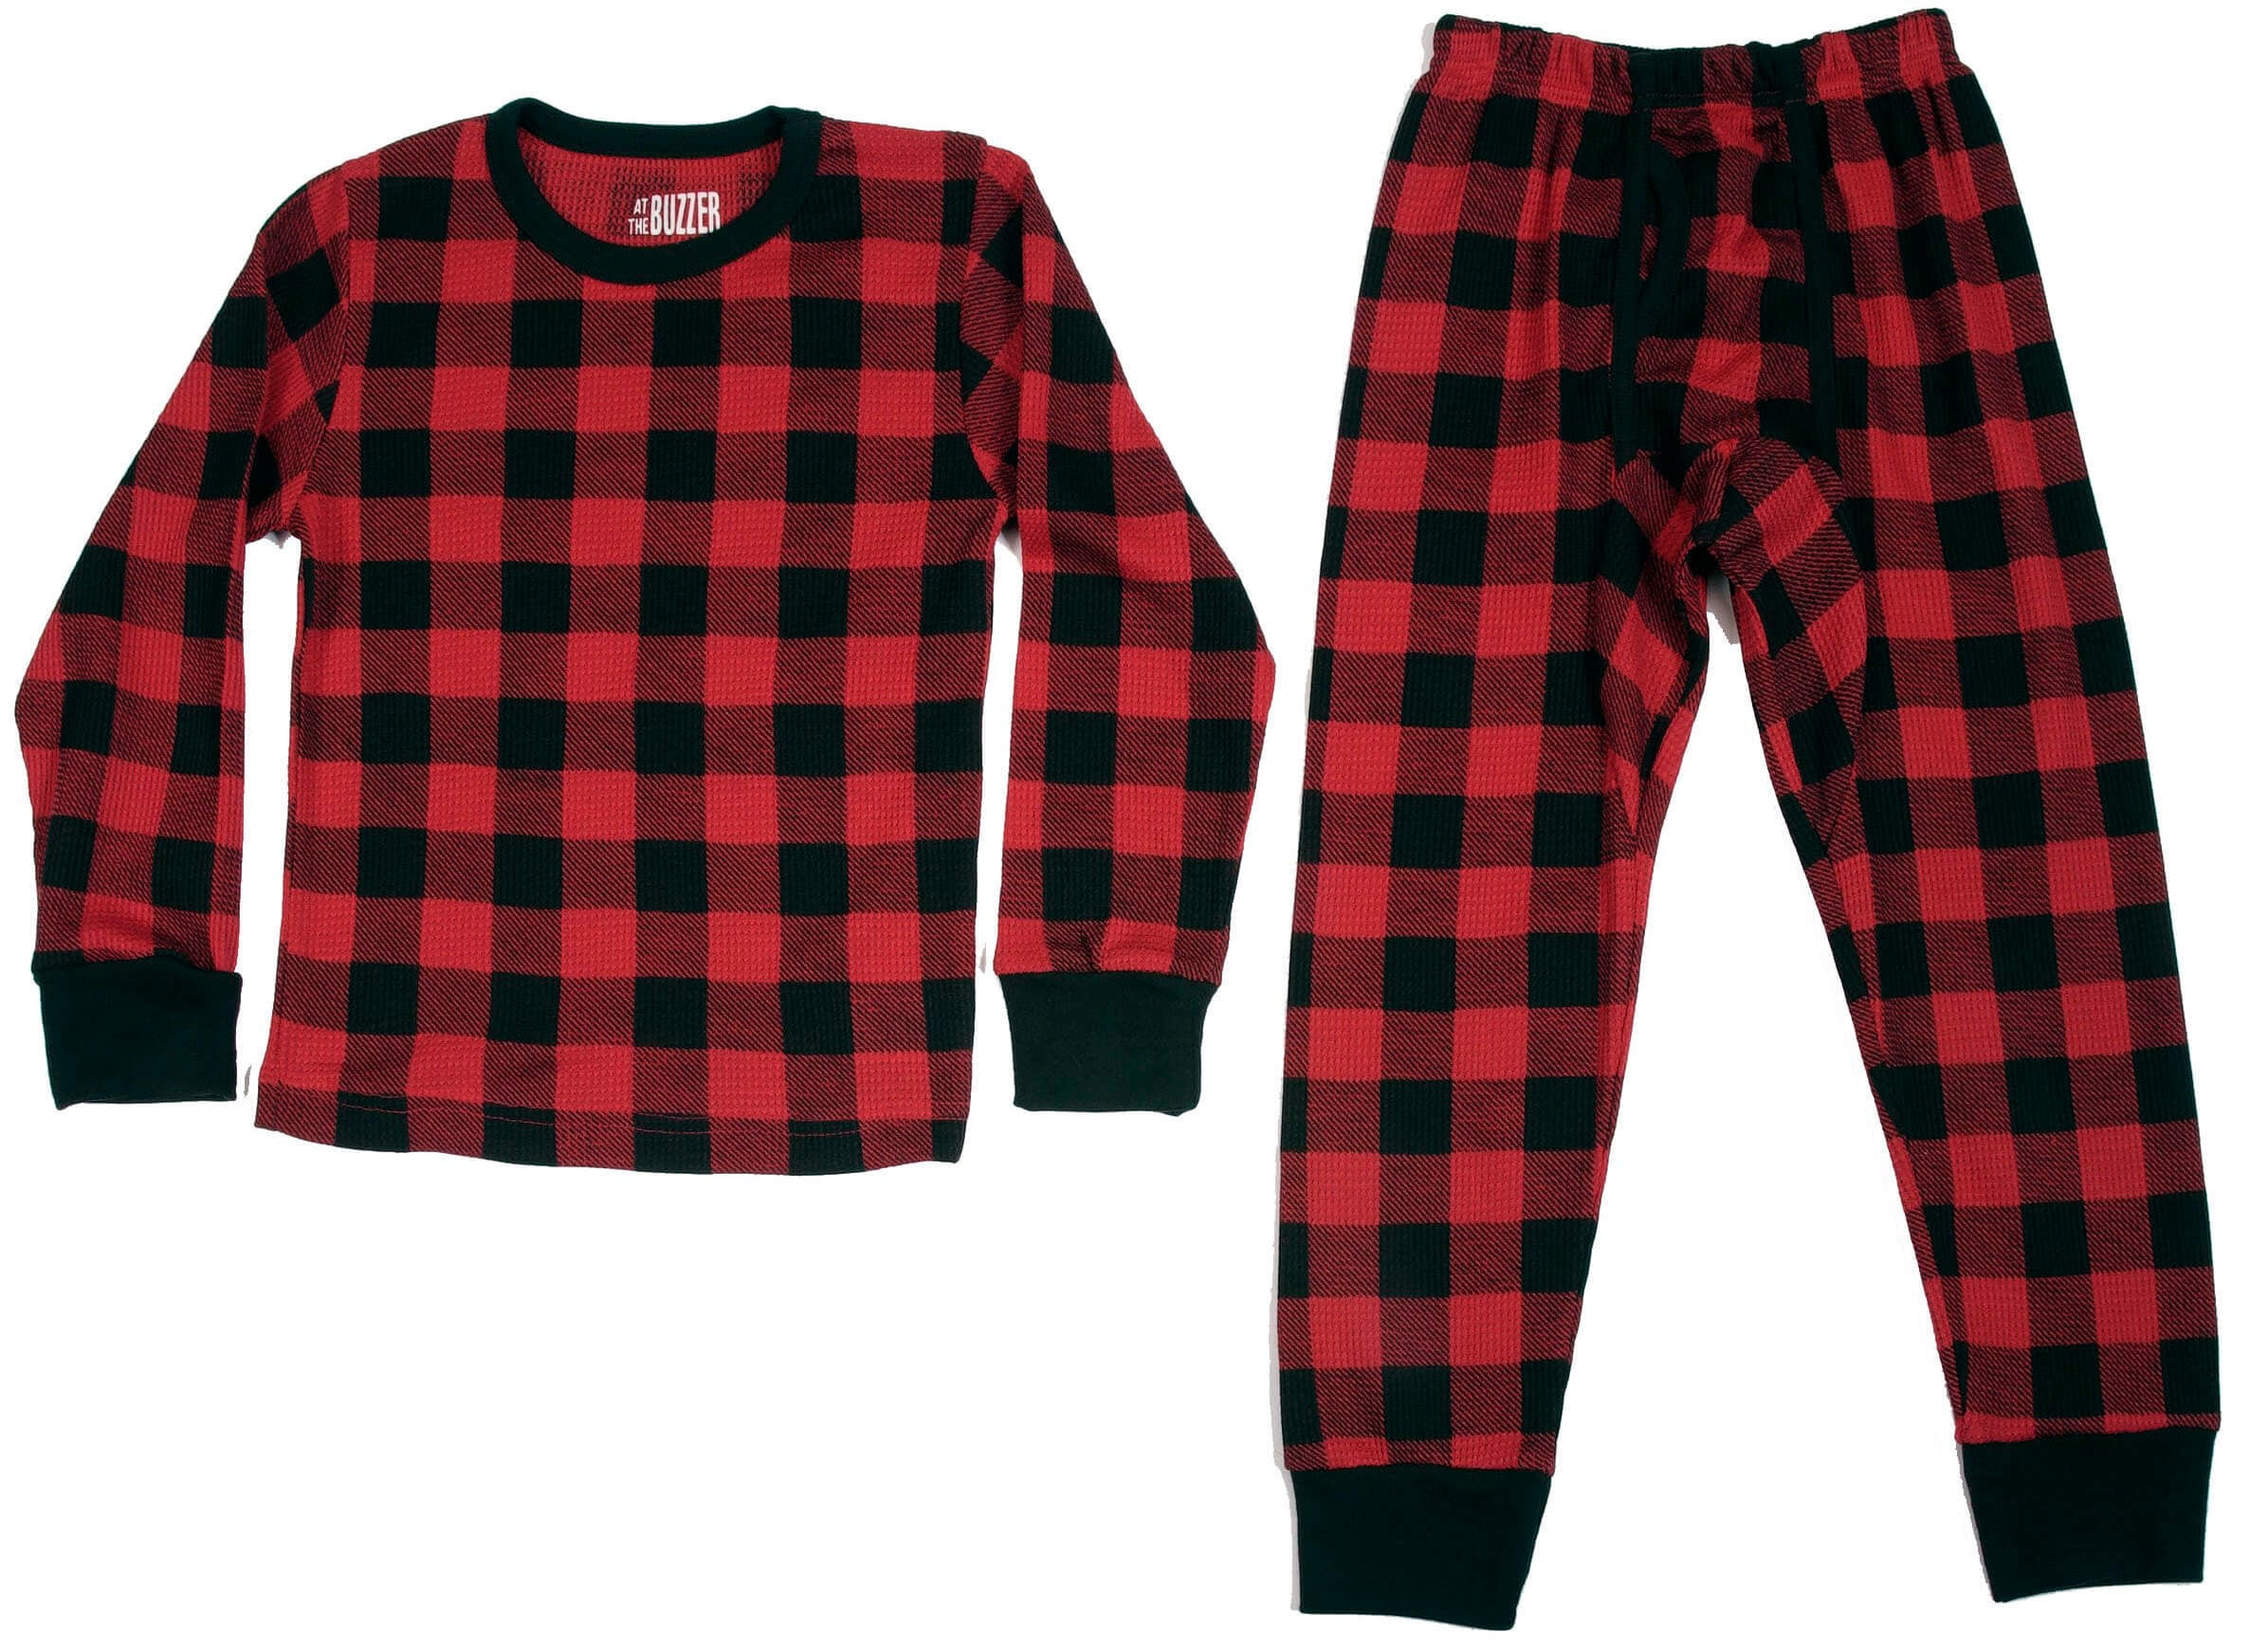 At The Buzzer Thermal Underwear Set for Boys (Boys 8, Red - Buffalo Plaid)